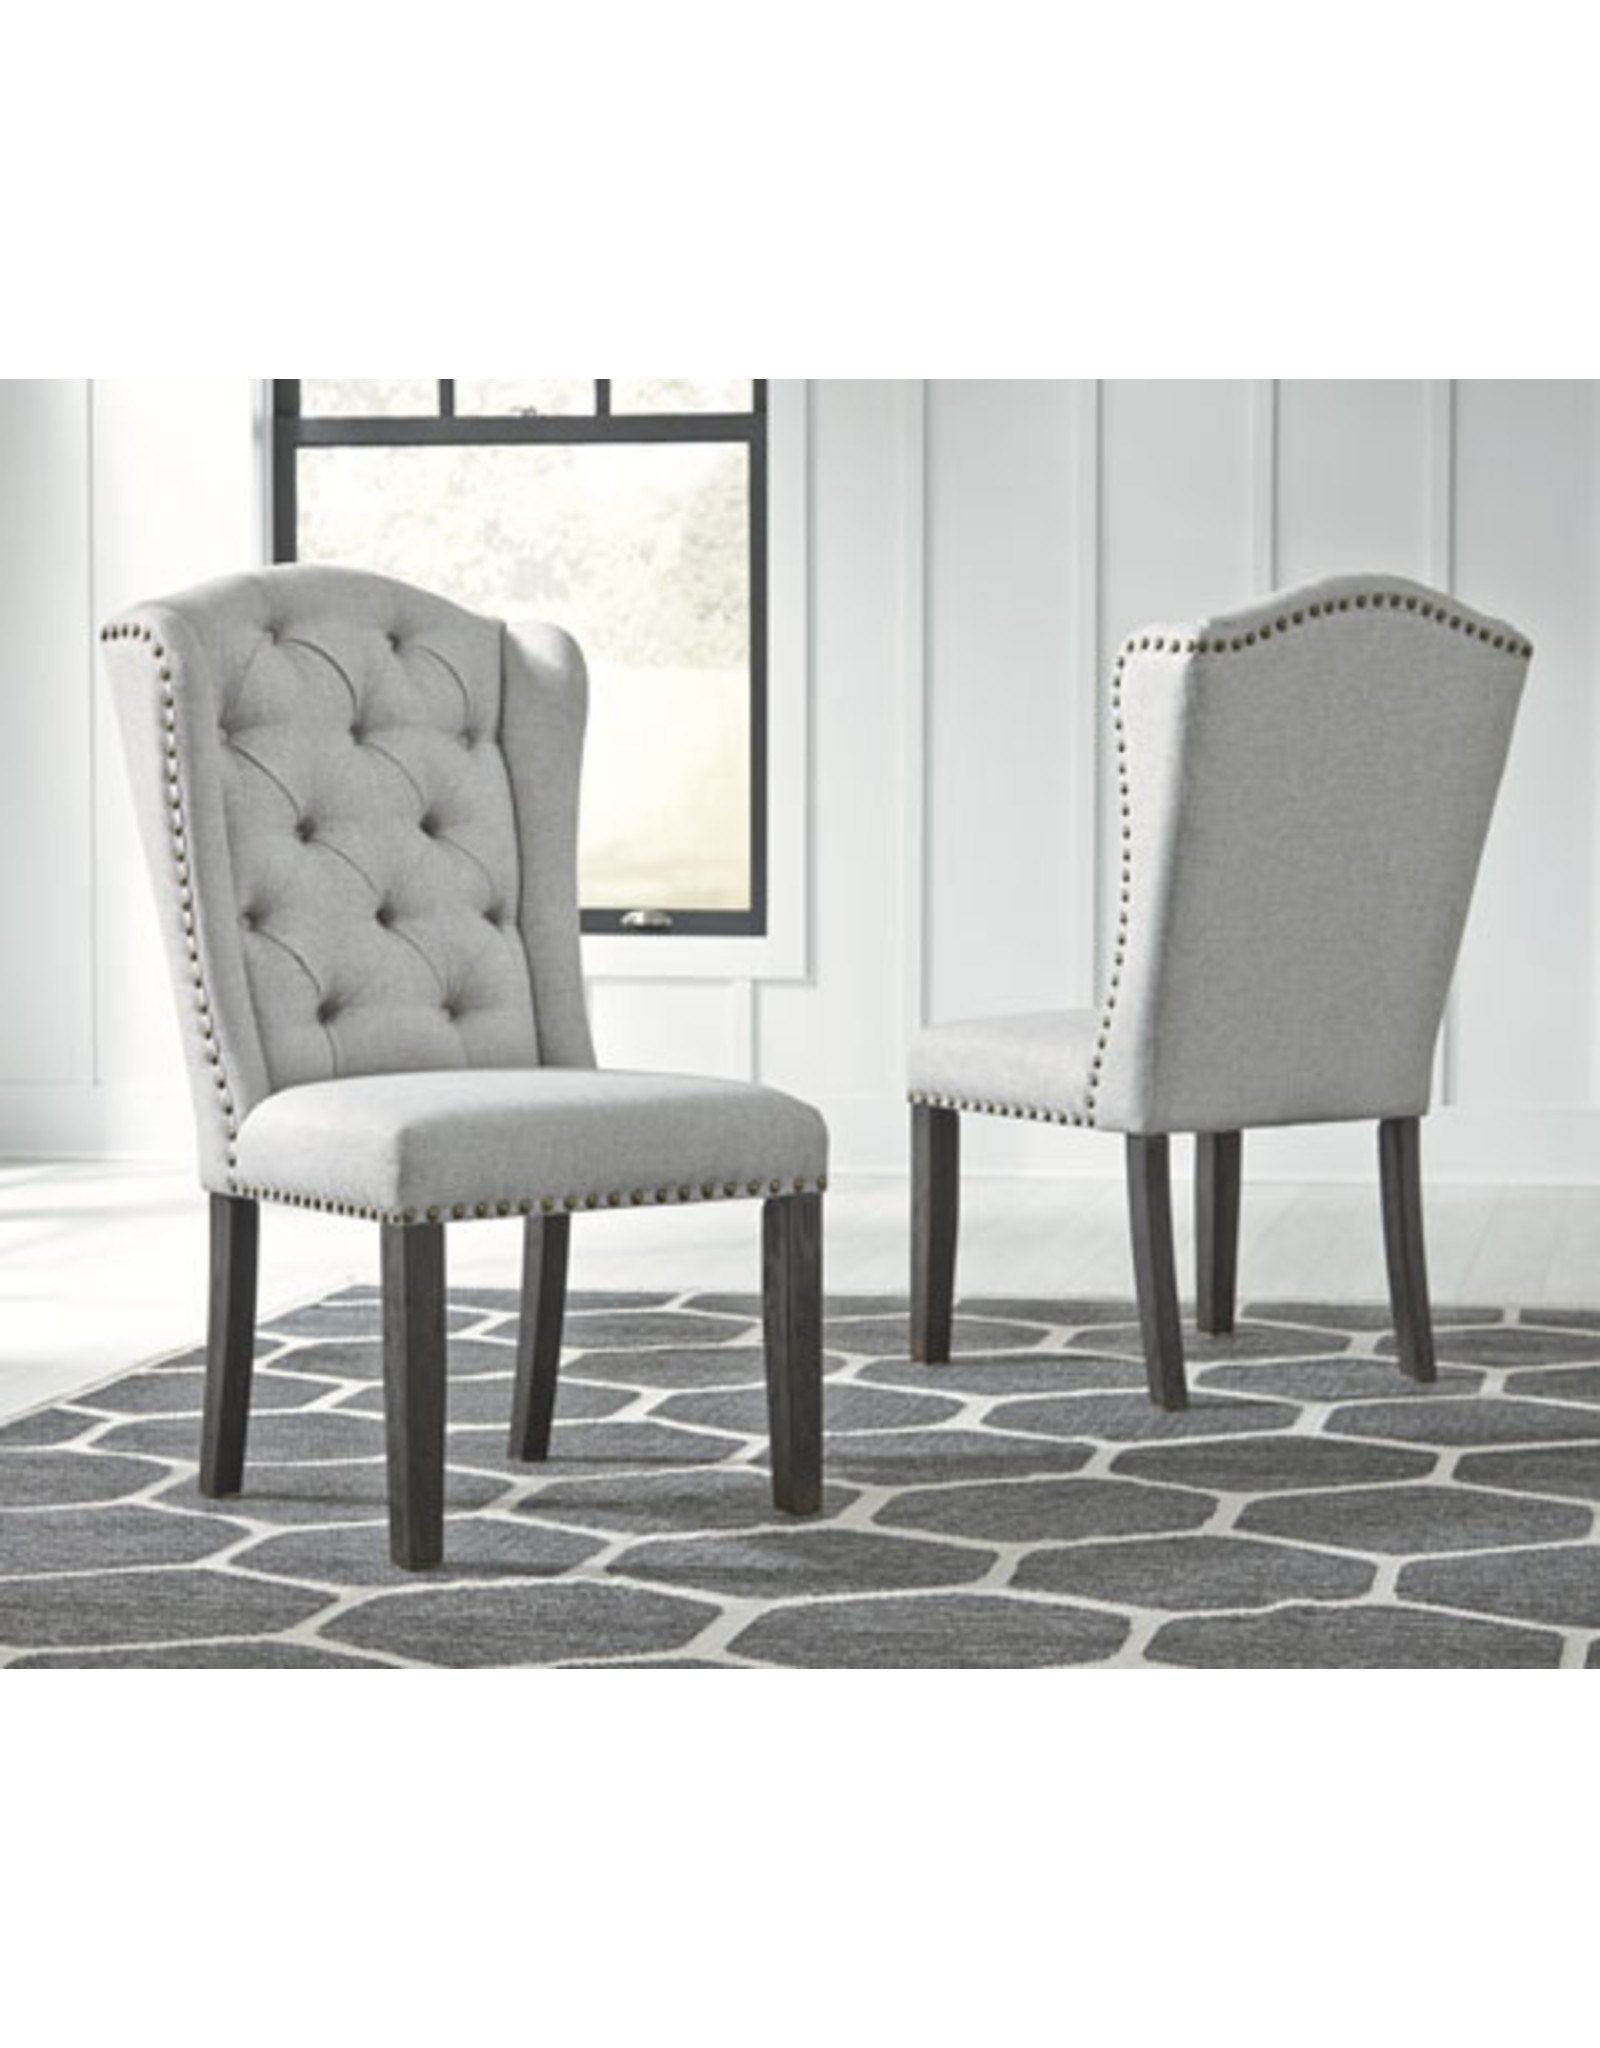 Jeanette D702-01 UPH Dining chair